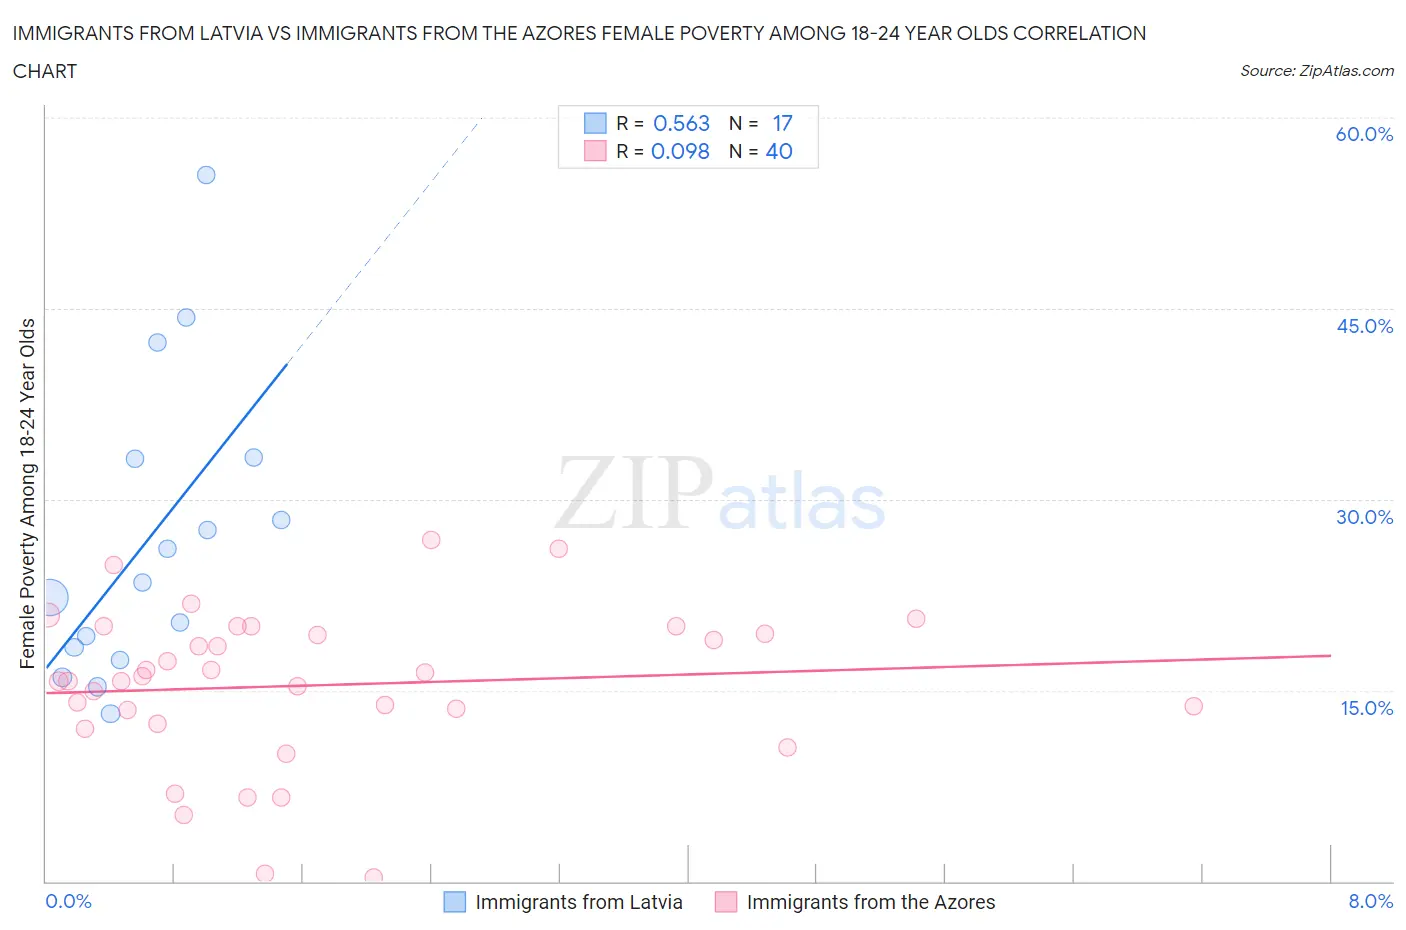 Immigrants from Latvia vs Immigrants from the Azores Female Poverty Among 18-24 Year Olds